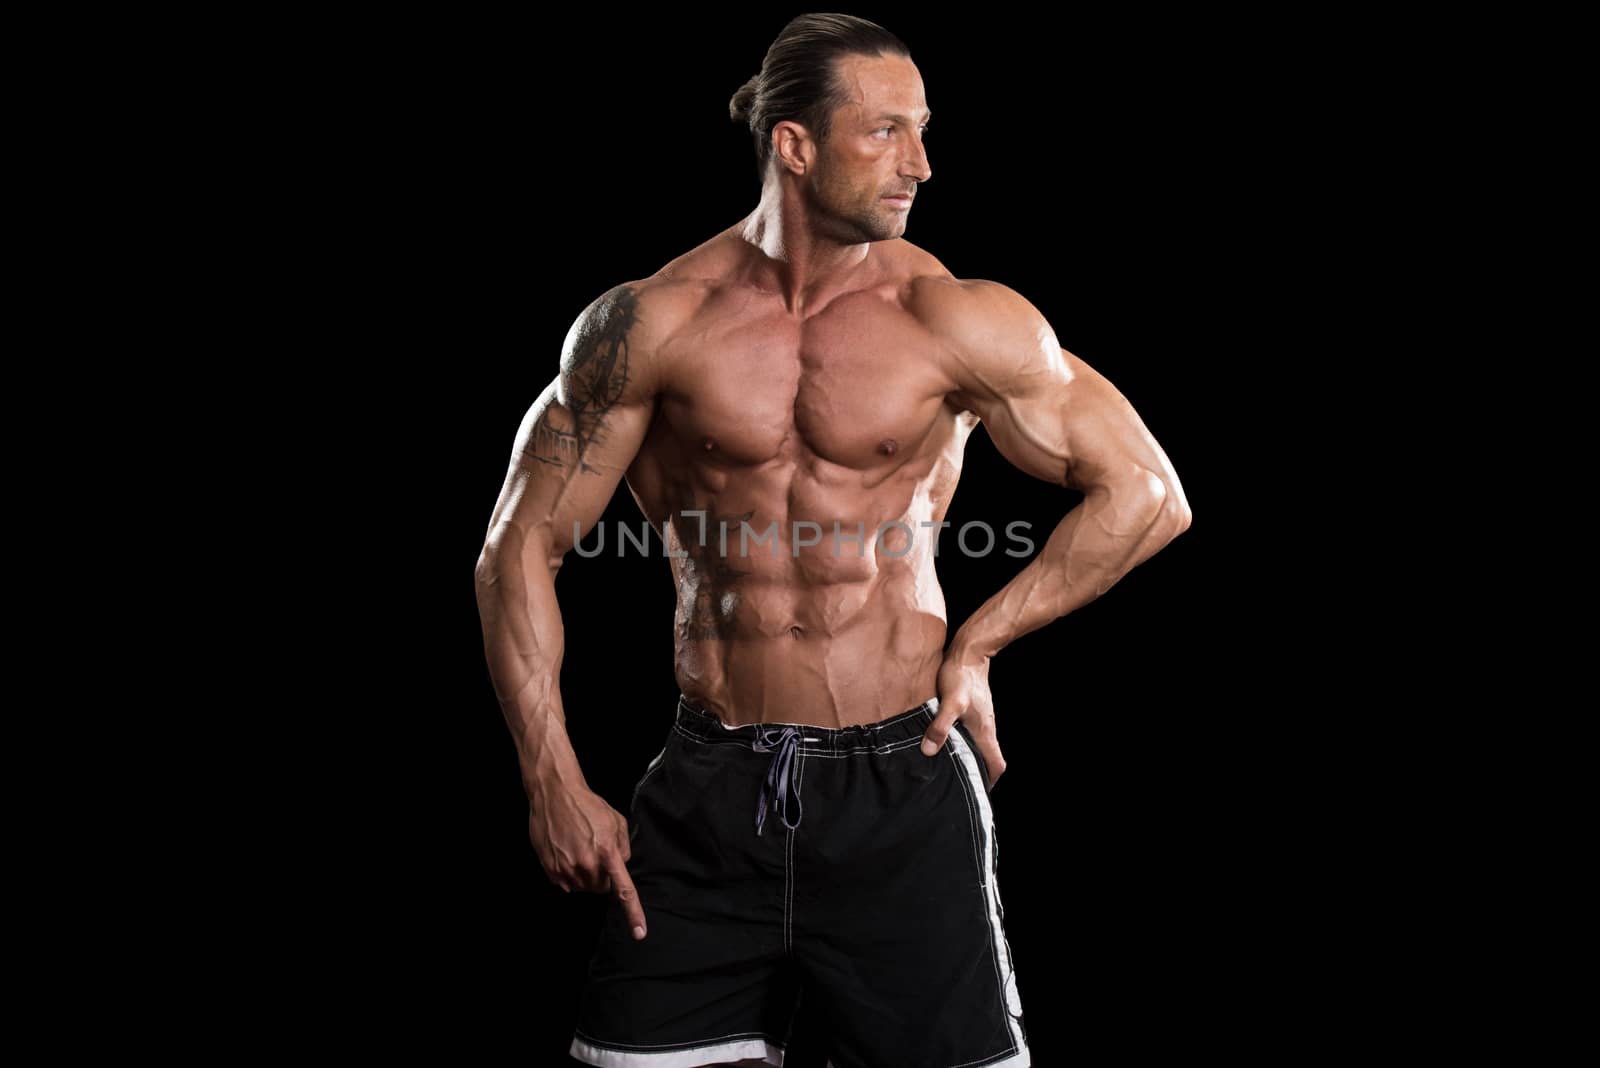 Muscular Mature Man Posing In Studio - Isolated On Black Background